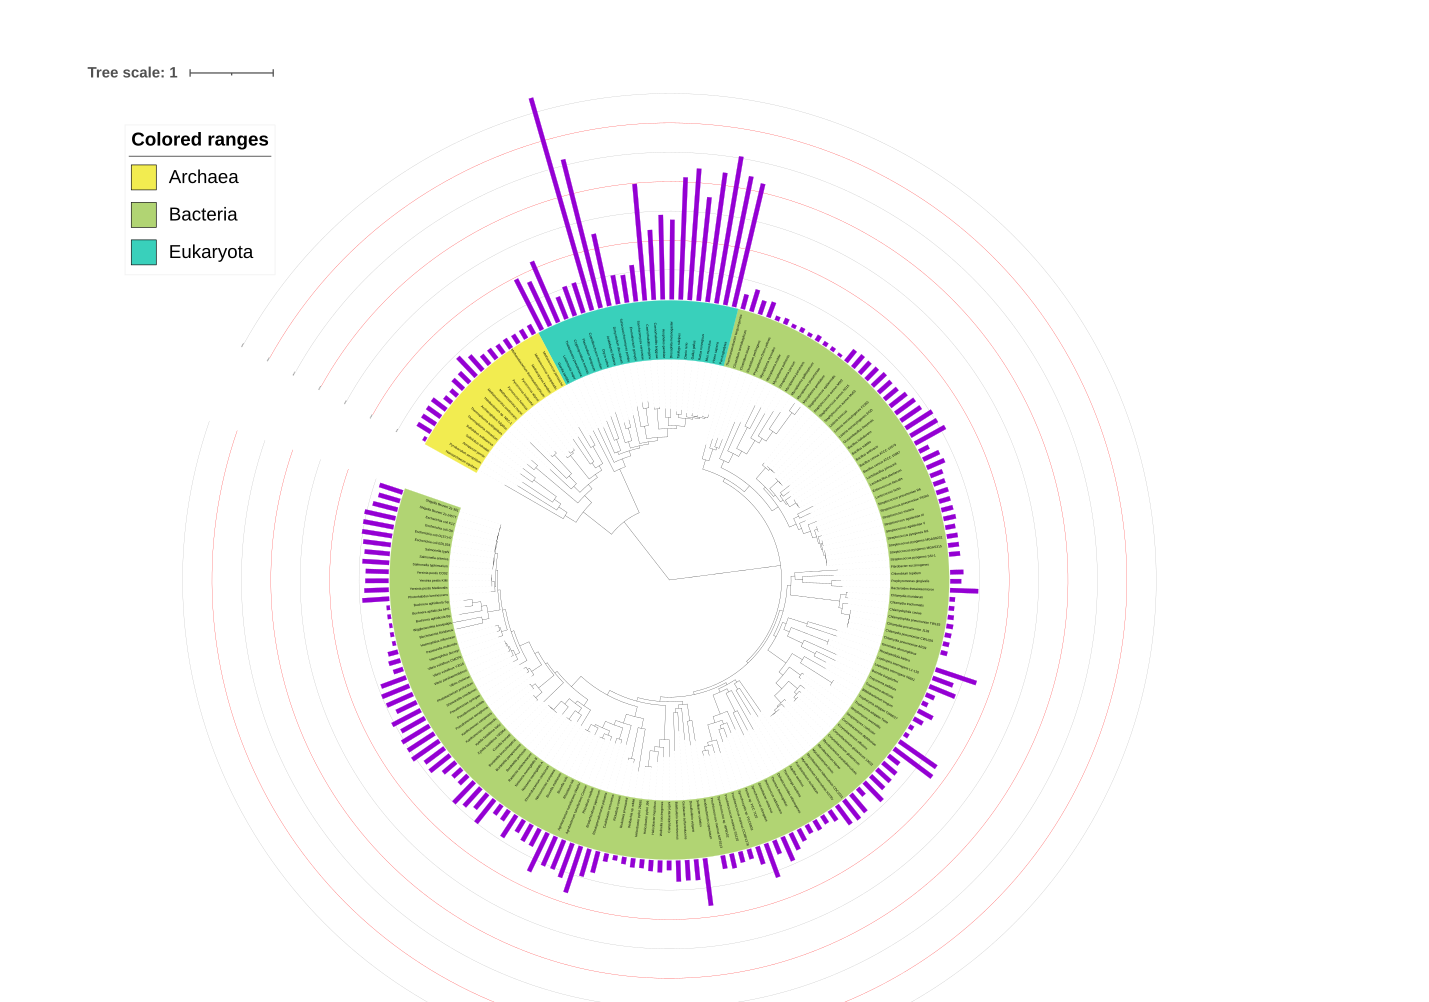 A circular, unrooted representation of organisms. Most of them are Bacteria. Archaea and Eukarya are represented as sister taxa.